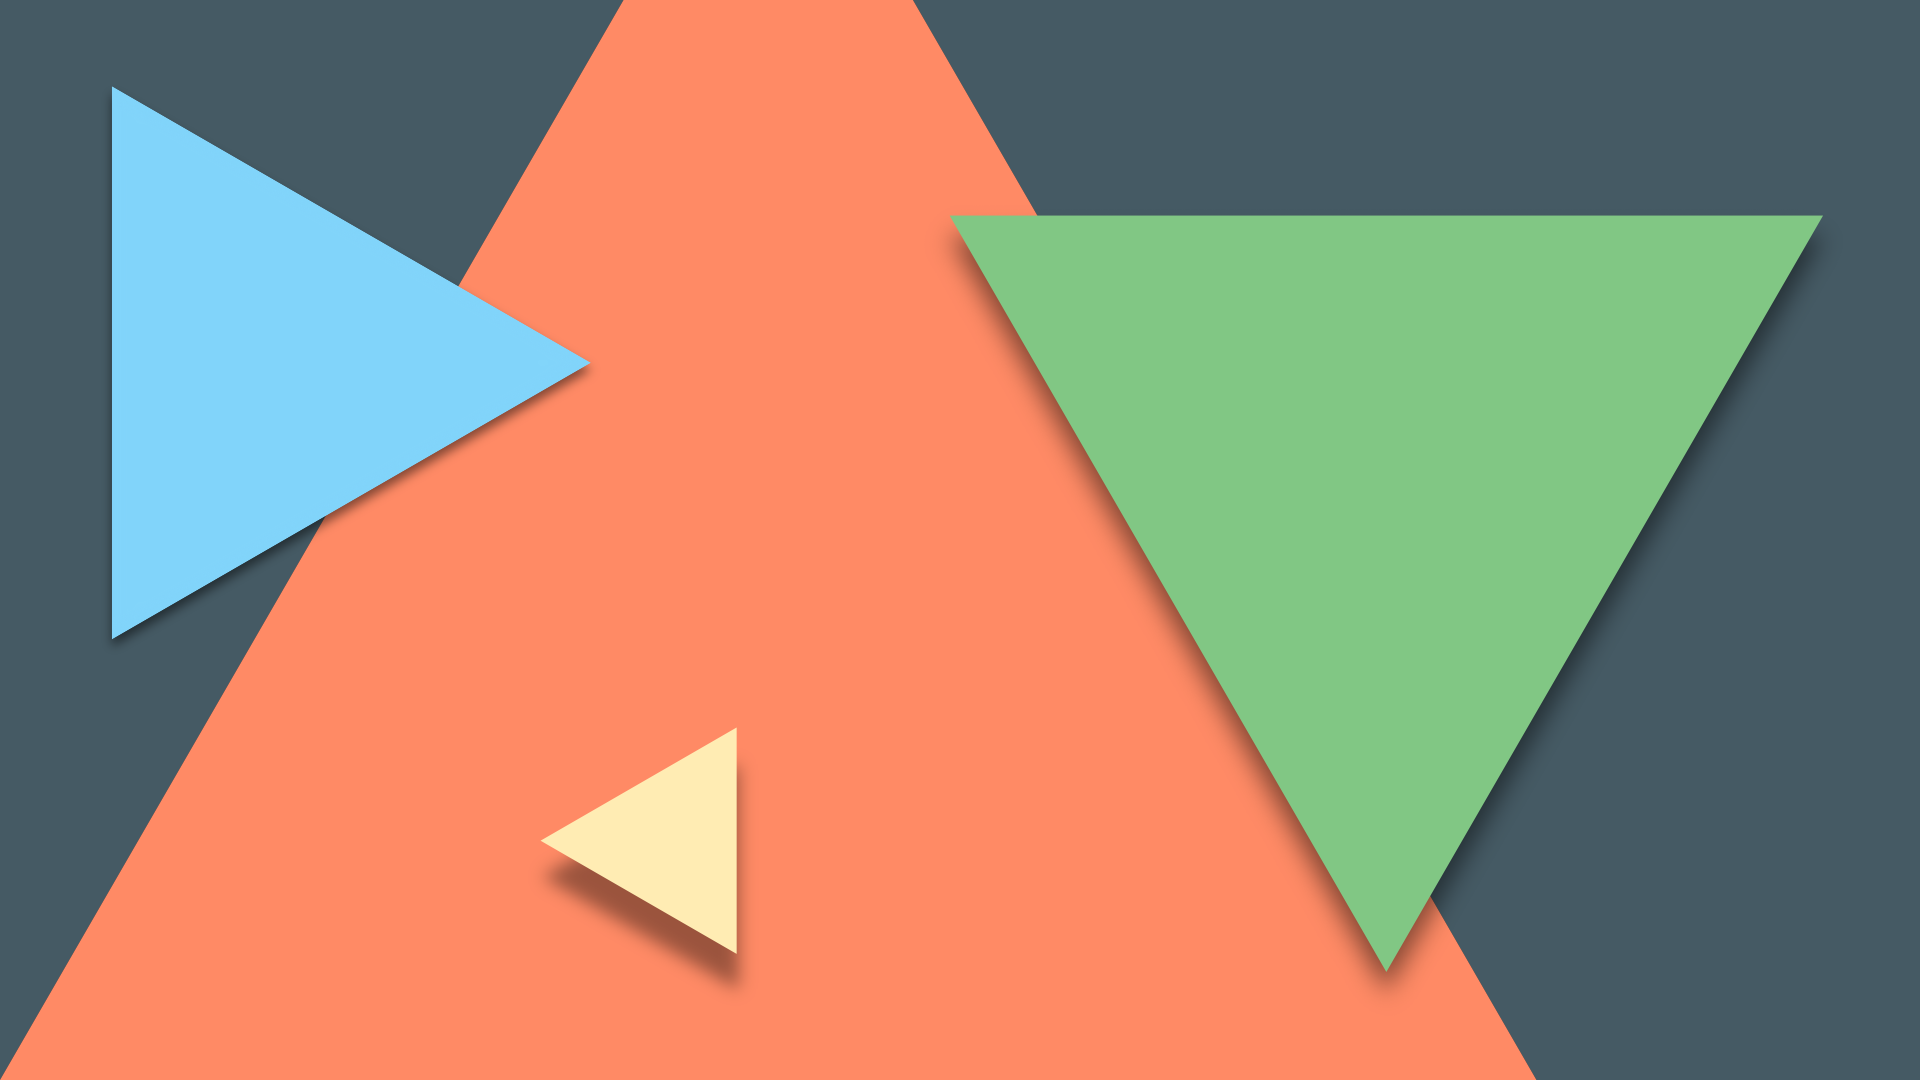 Wallpaper Material design of triangles